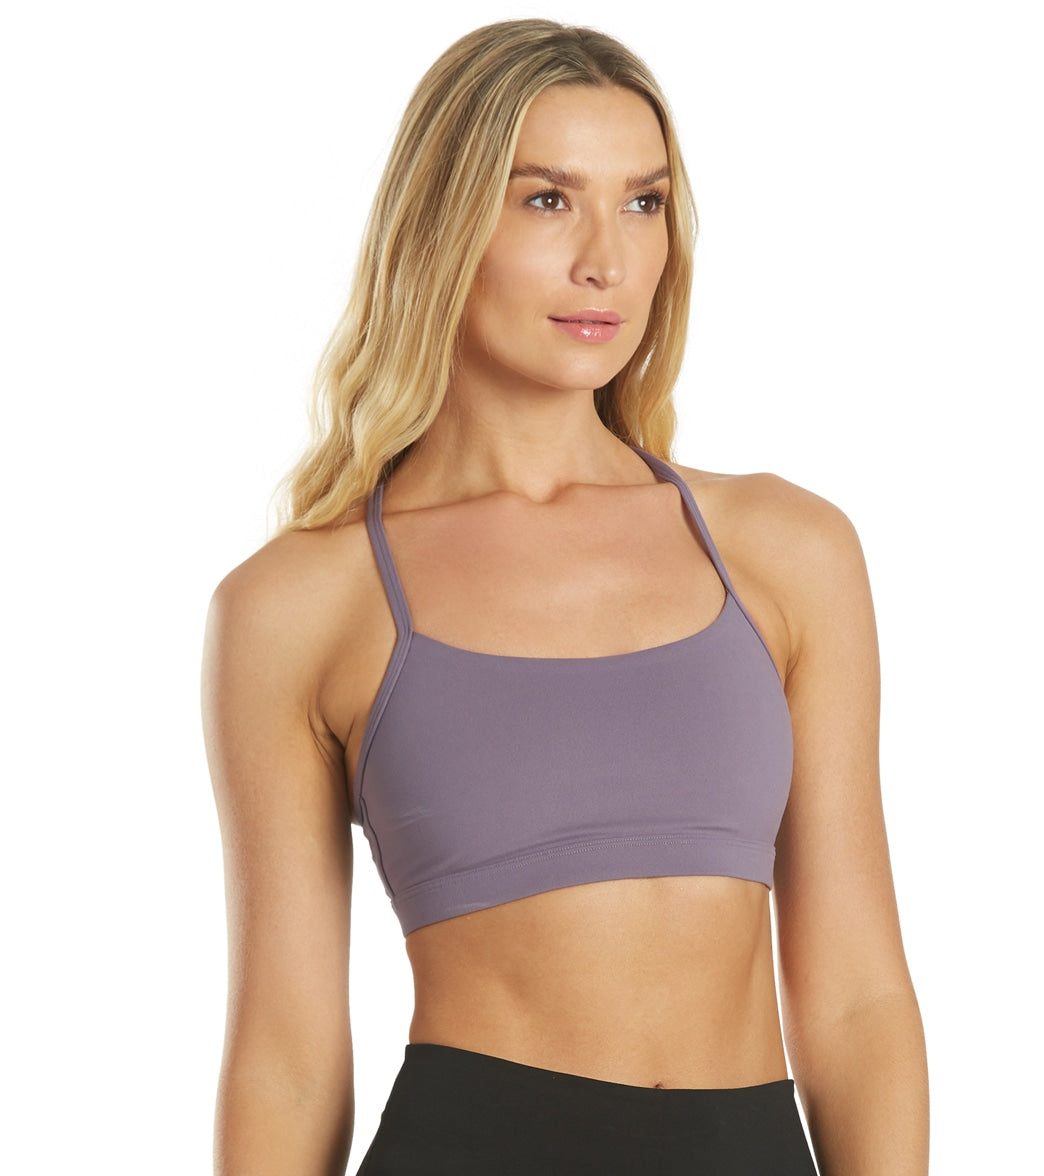 Everyday Yoga Delight Solid Racer Back Sports Bra at YogaOutlet